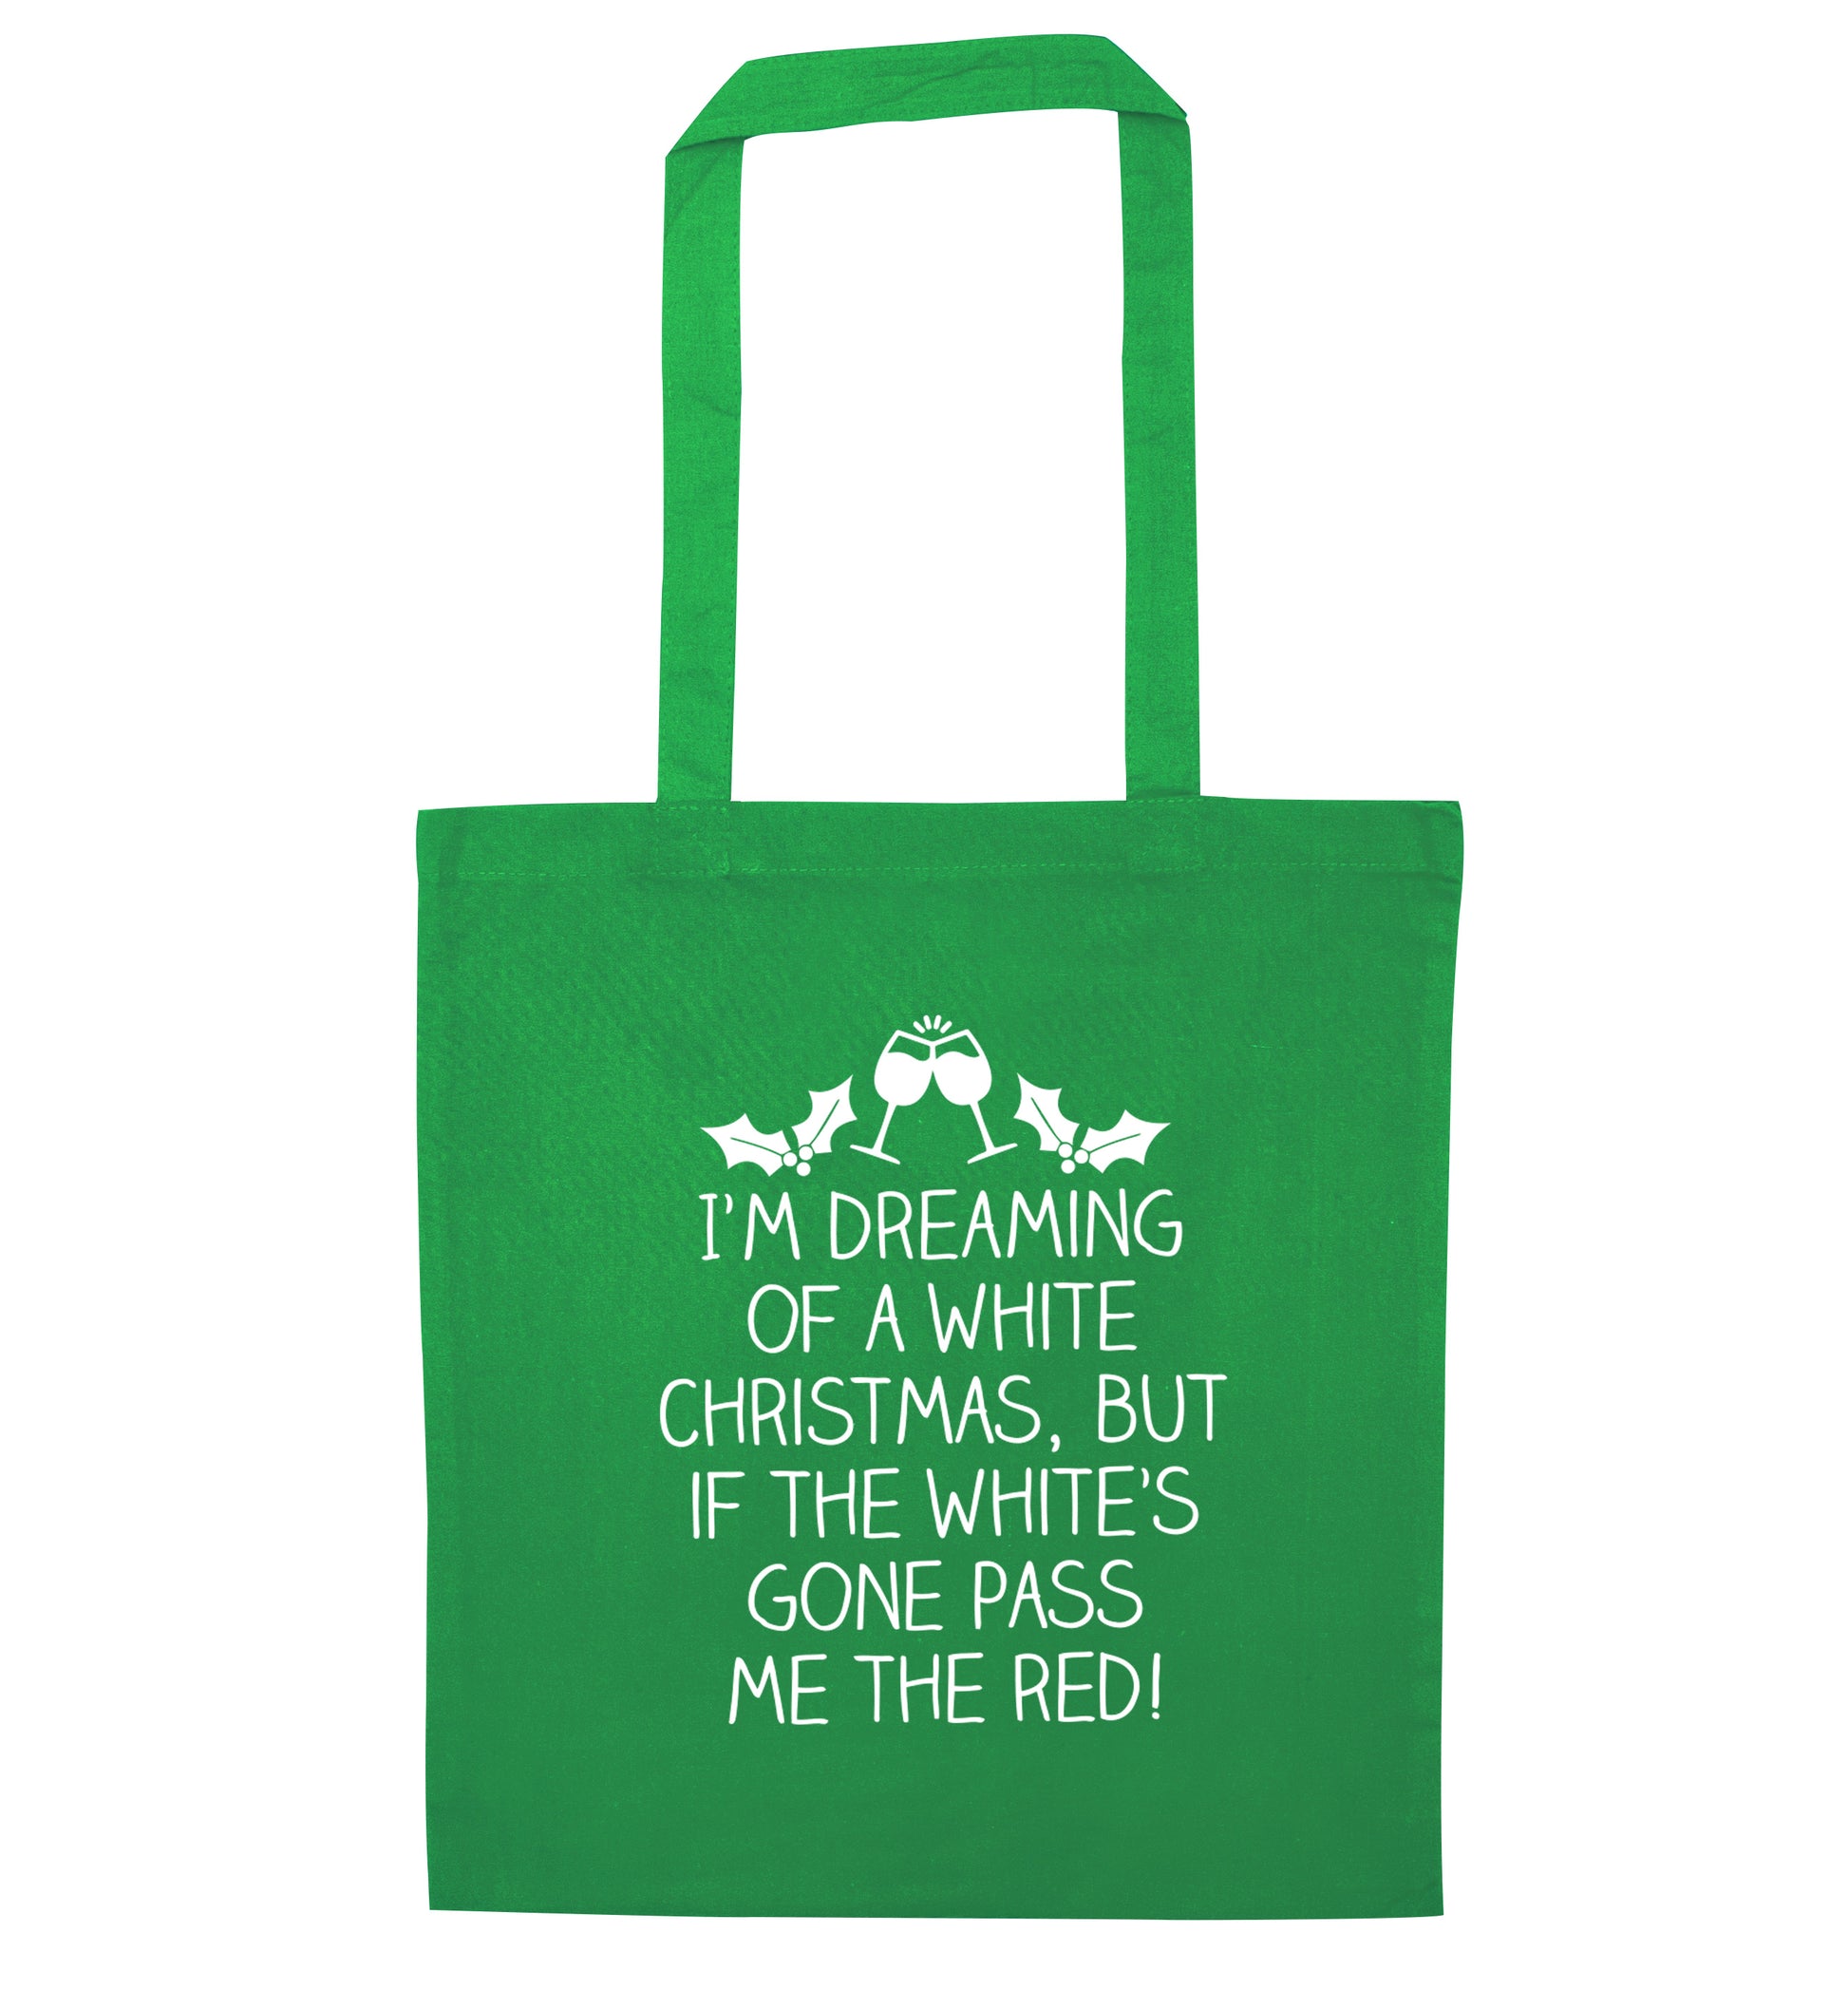 I'm dreaming of a white christmas, but if the white's gone pass me the red! green tote bag